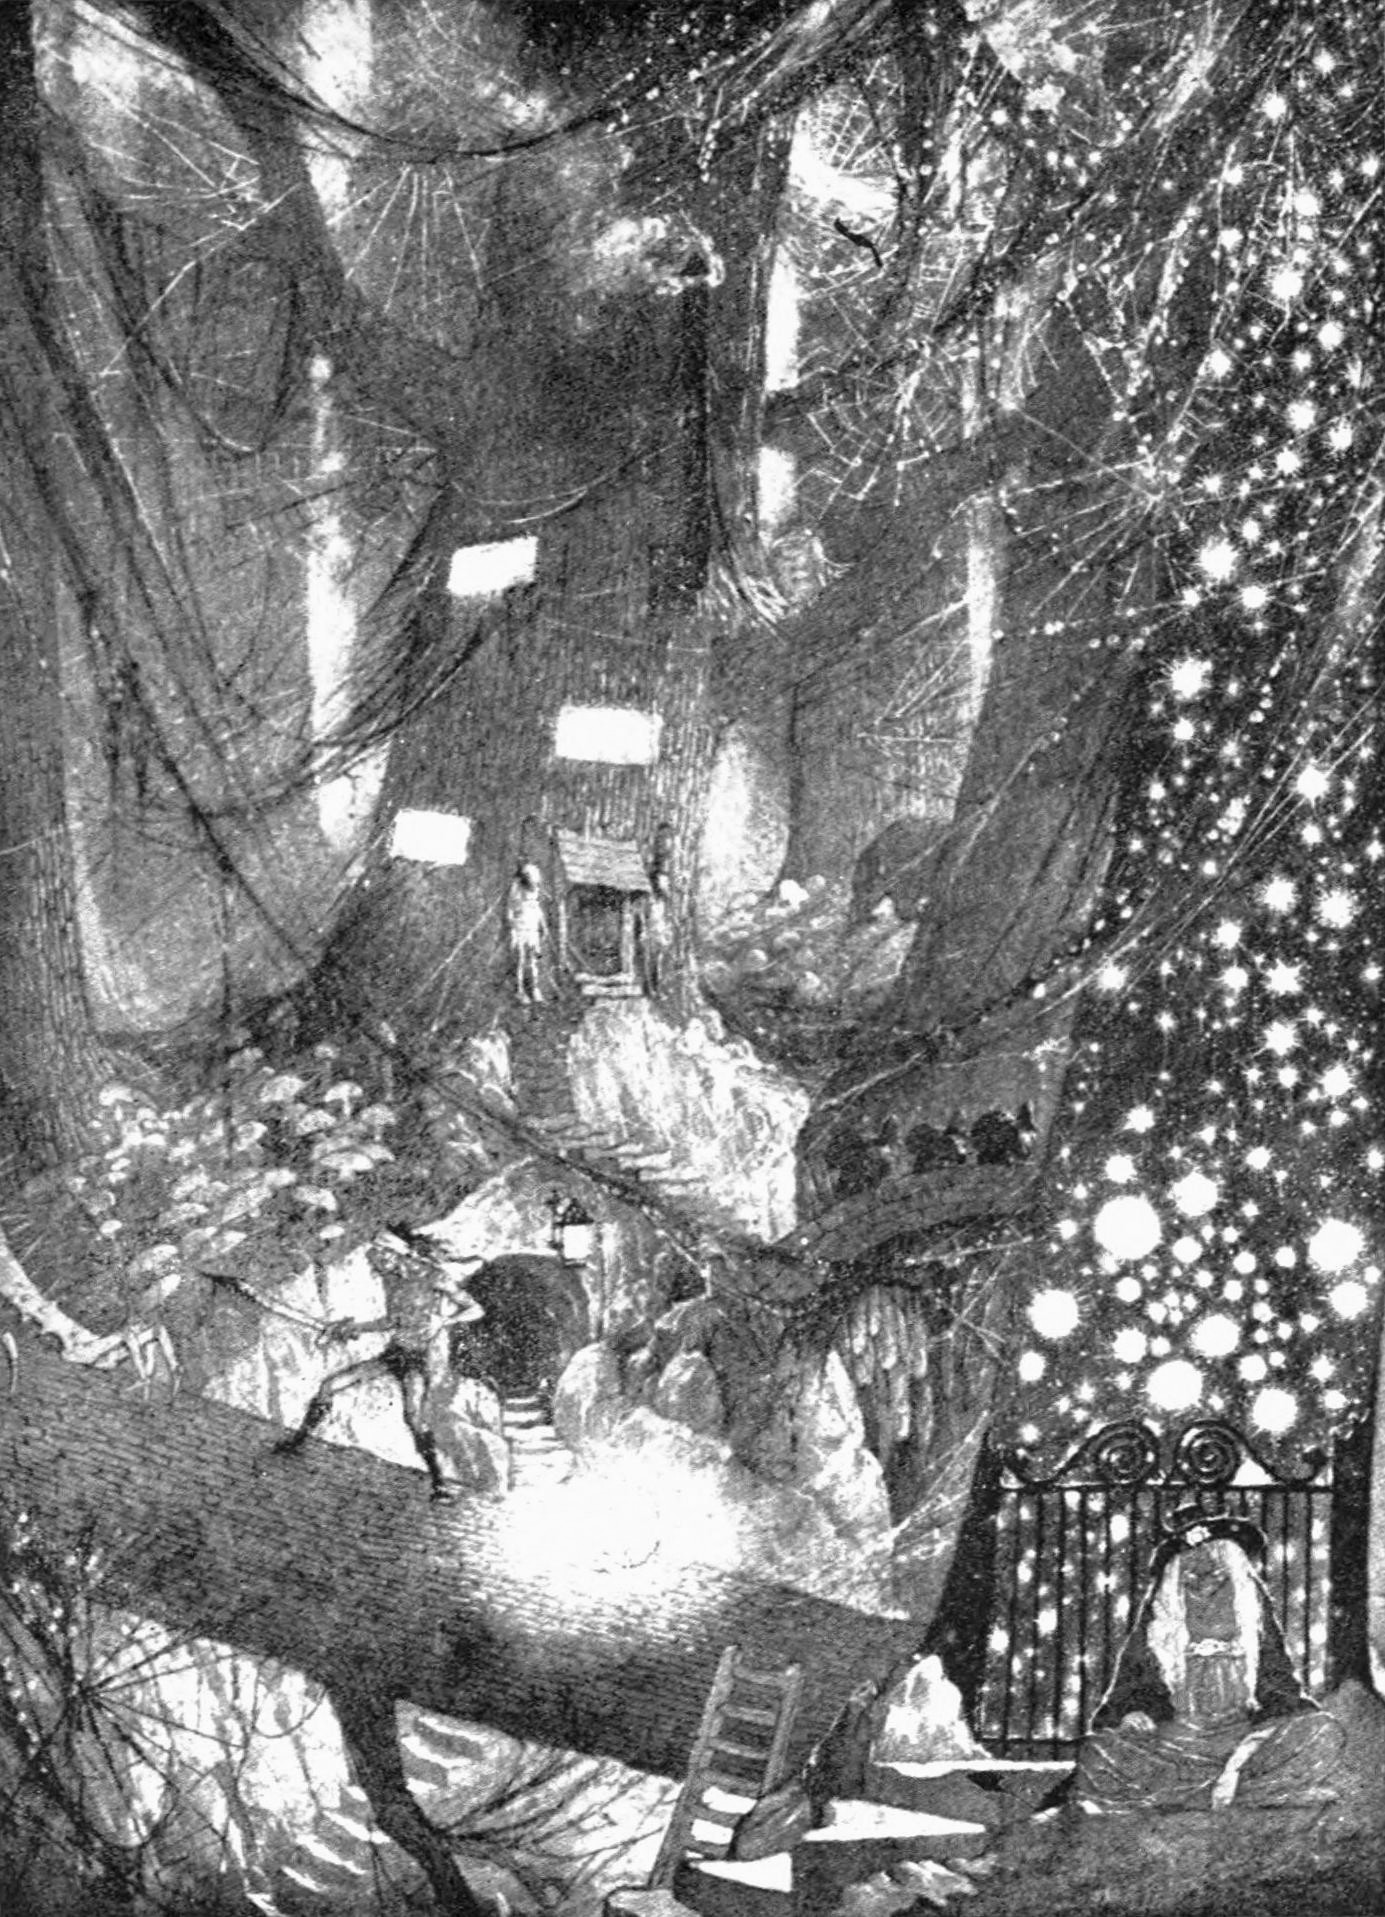 Steps lead up to a huge dark tree with a door in its base. Spiderwebs cover the canopy. A blindfolded creature weilding a sword menaces a monster, who lies outside the frame but whose feet are visible.